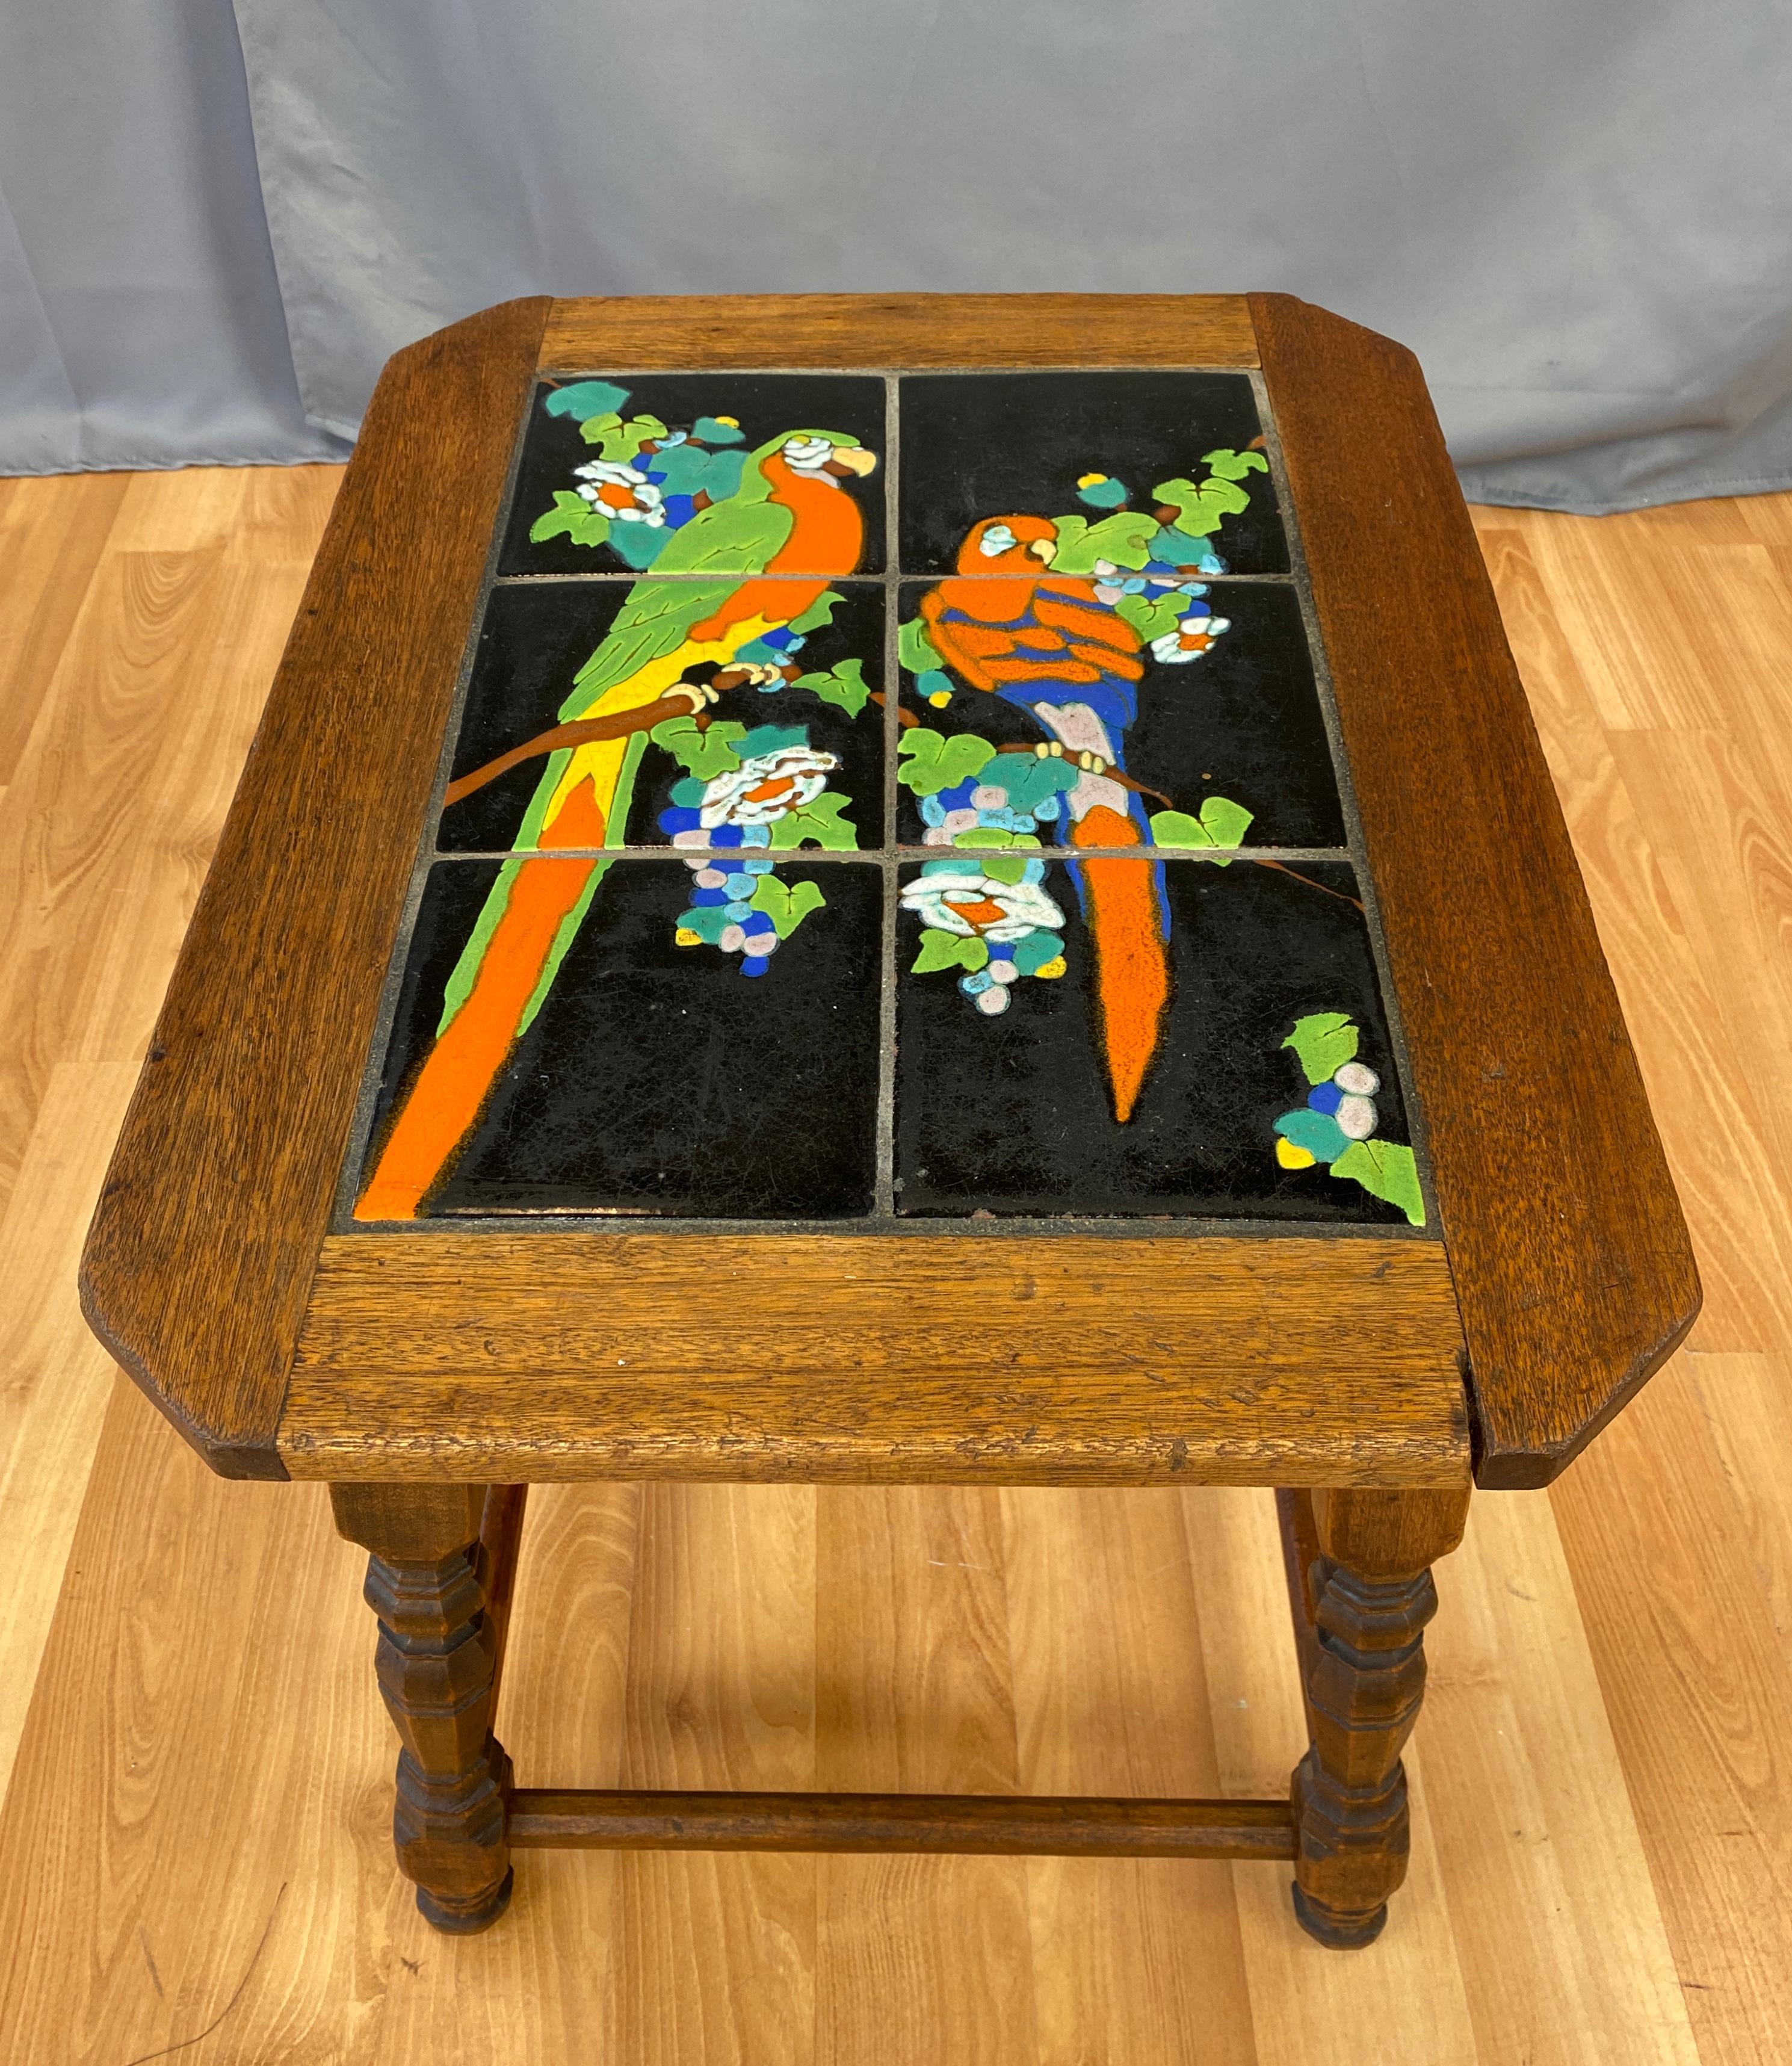 A 1920s-1930s Catalina tile top table with parrots, classic California Mission.
Six tiles with the base and trim in oak.